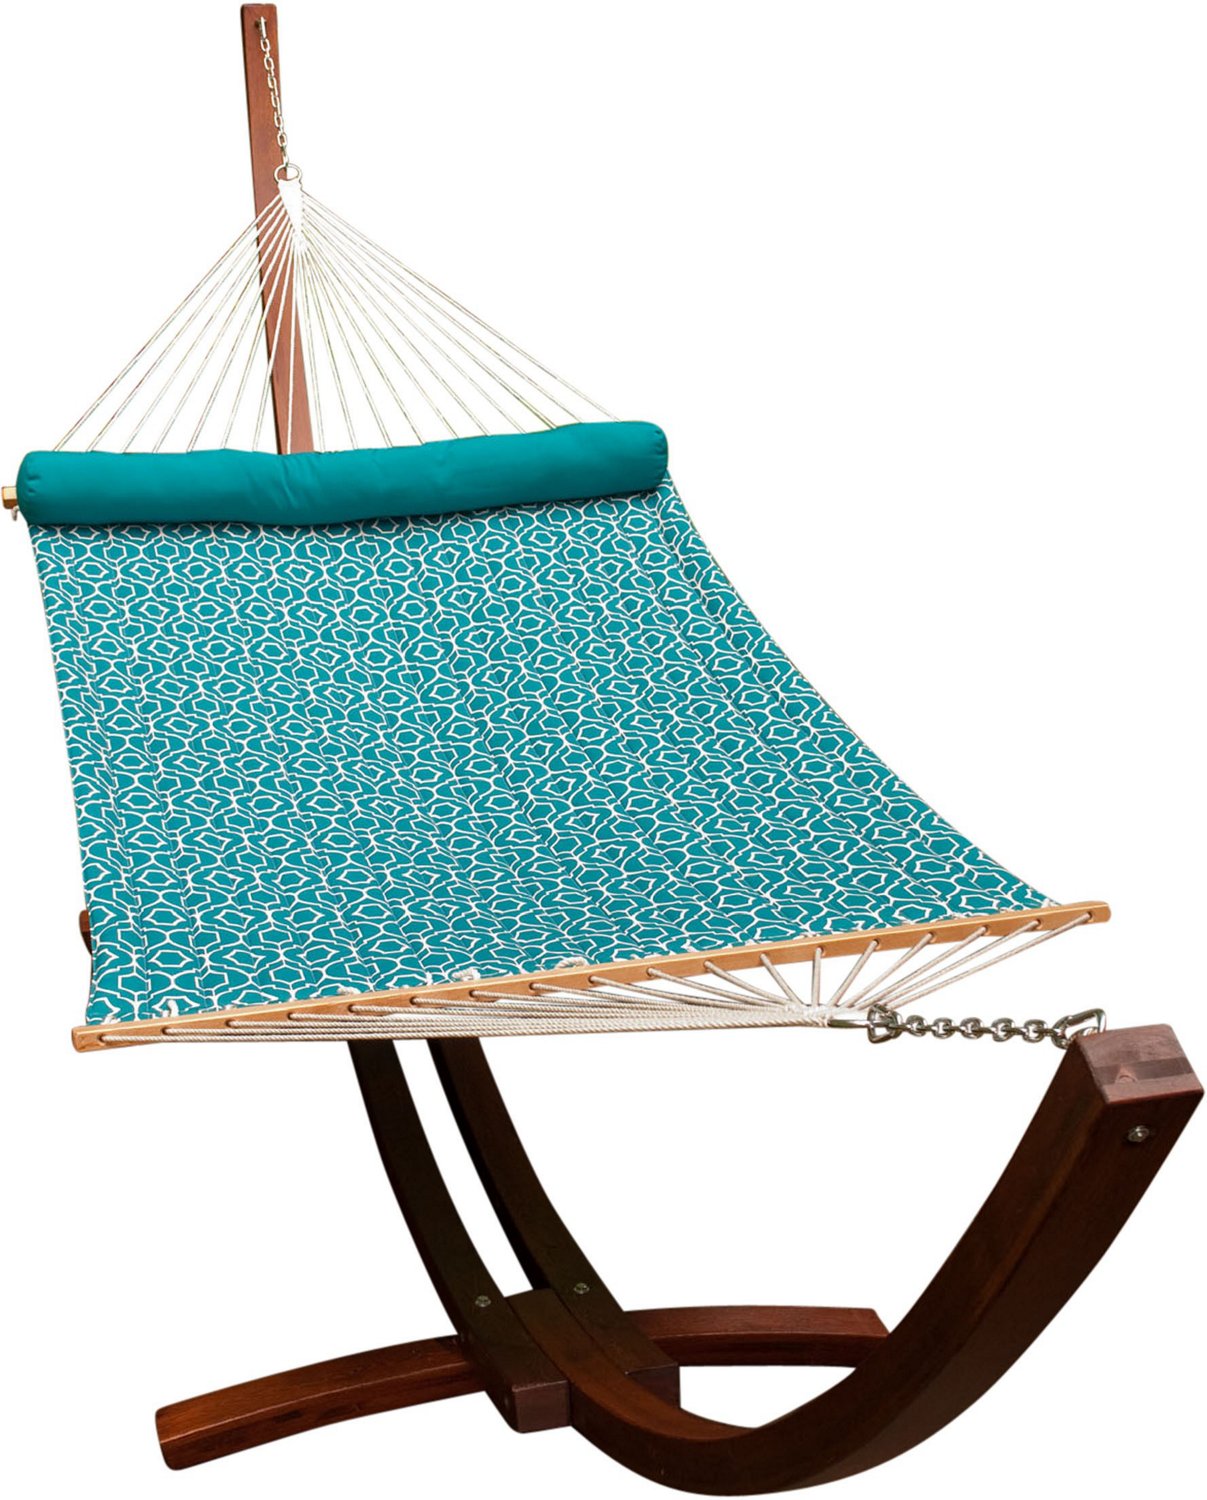 Algoma 12 Foot Wood Arc Frame With Quilted Hammock And Pillow Academy